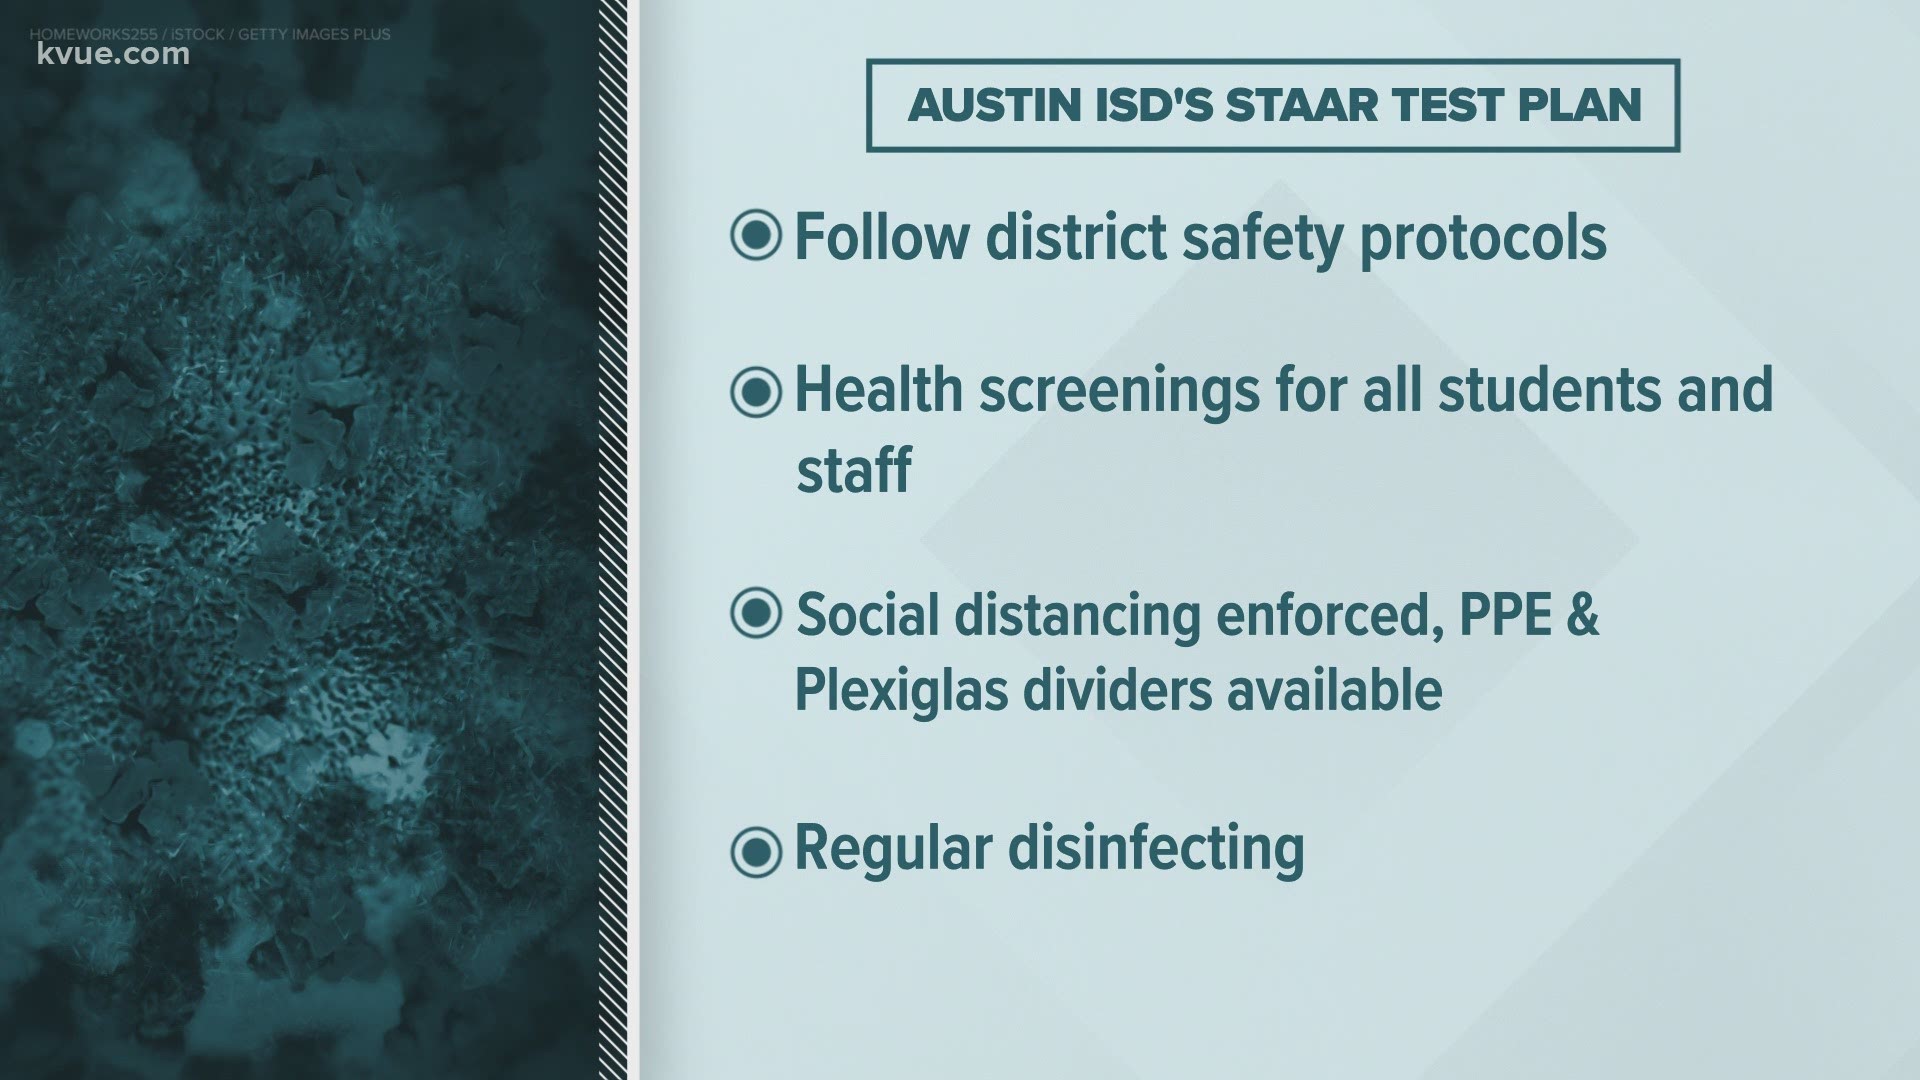 Thousands of Texas kids are coming back to campus for mandatory state testing. But students will see a few changes to STAAR testing this year.